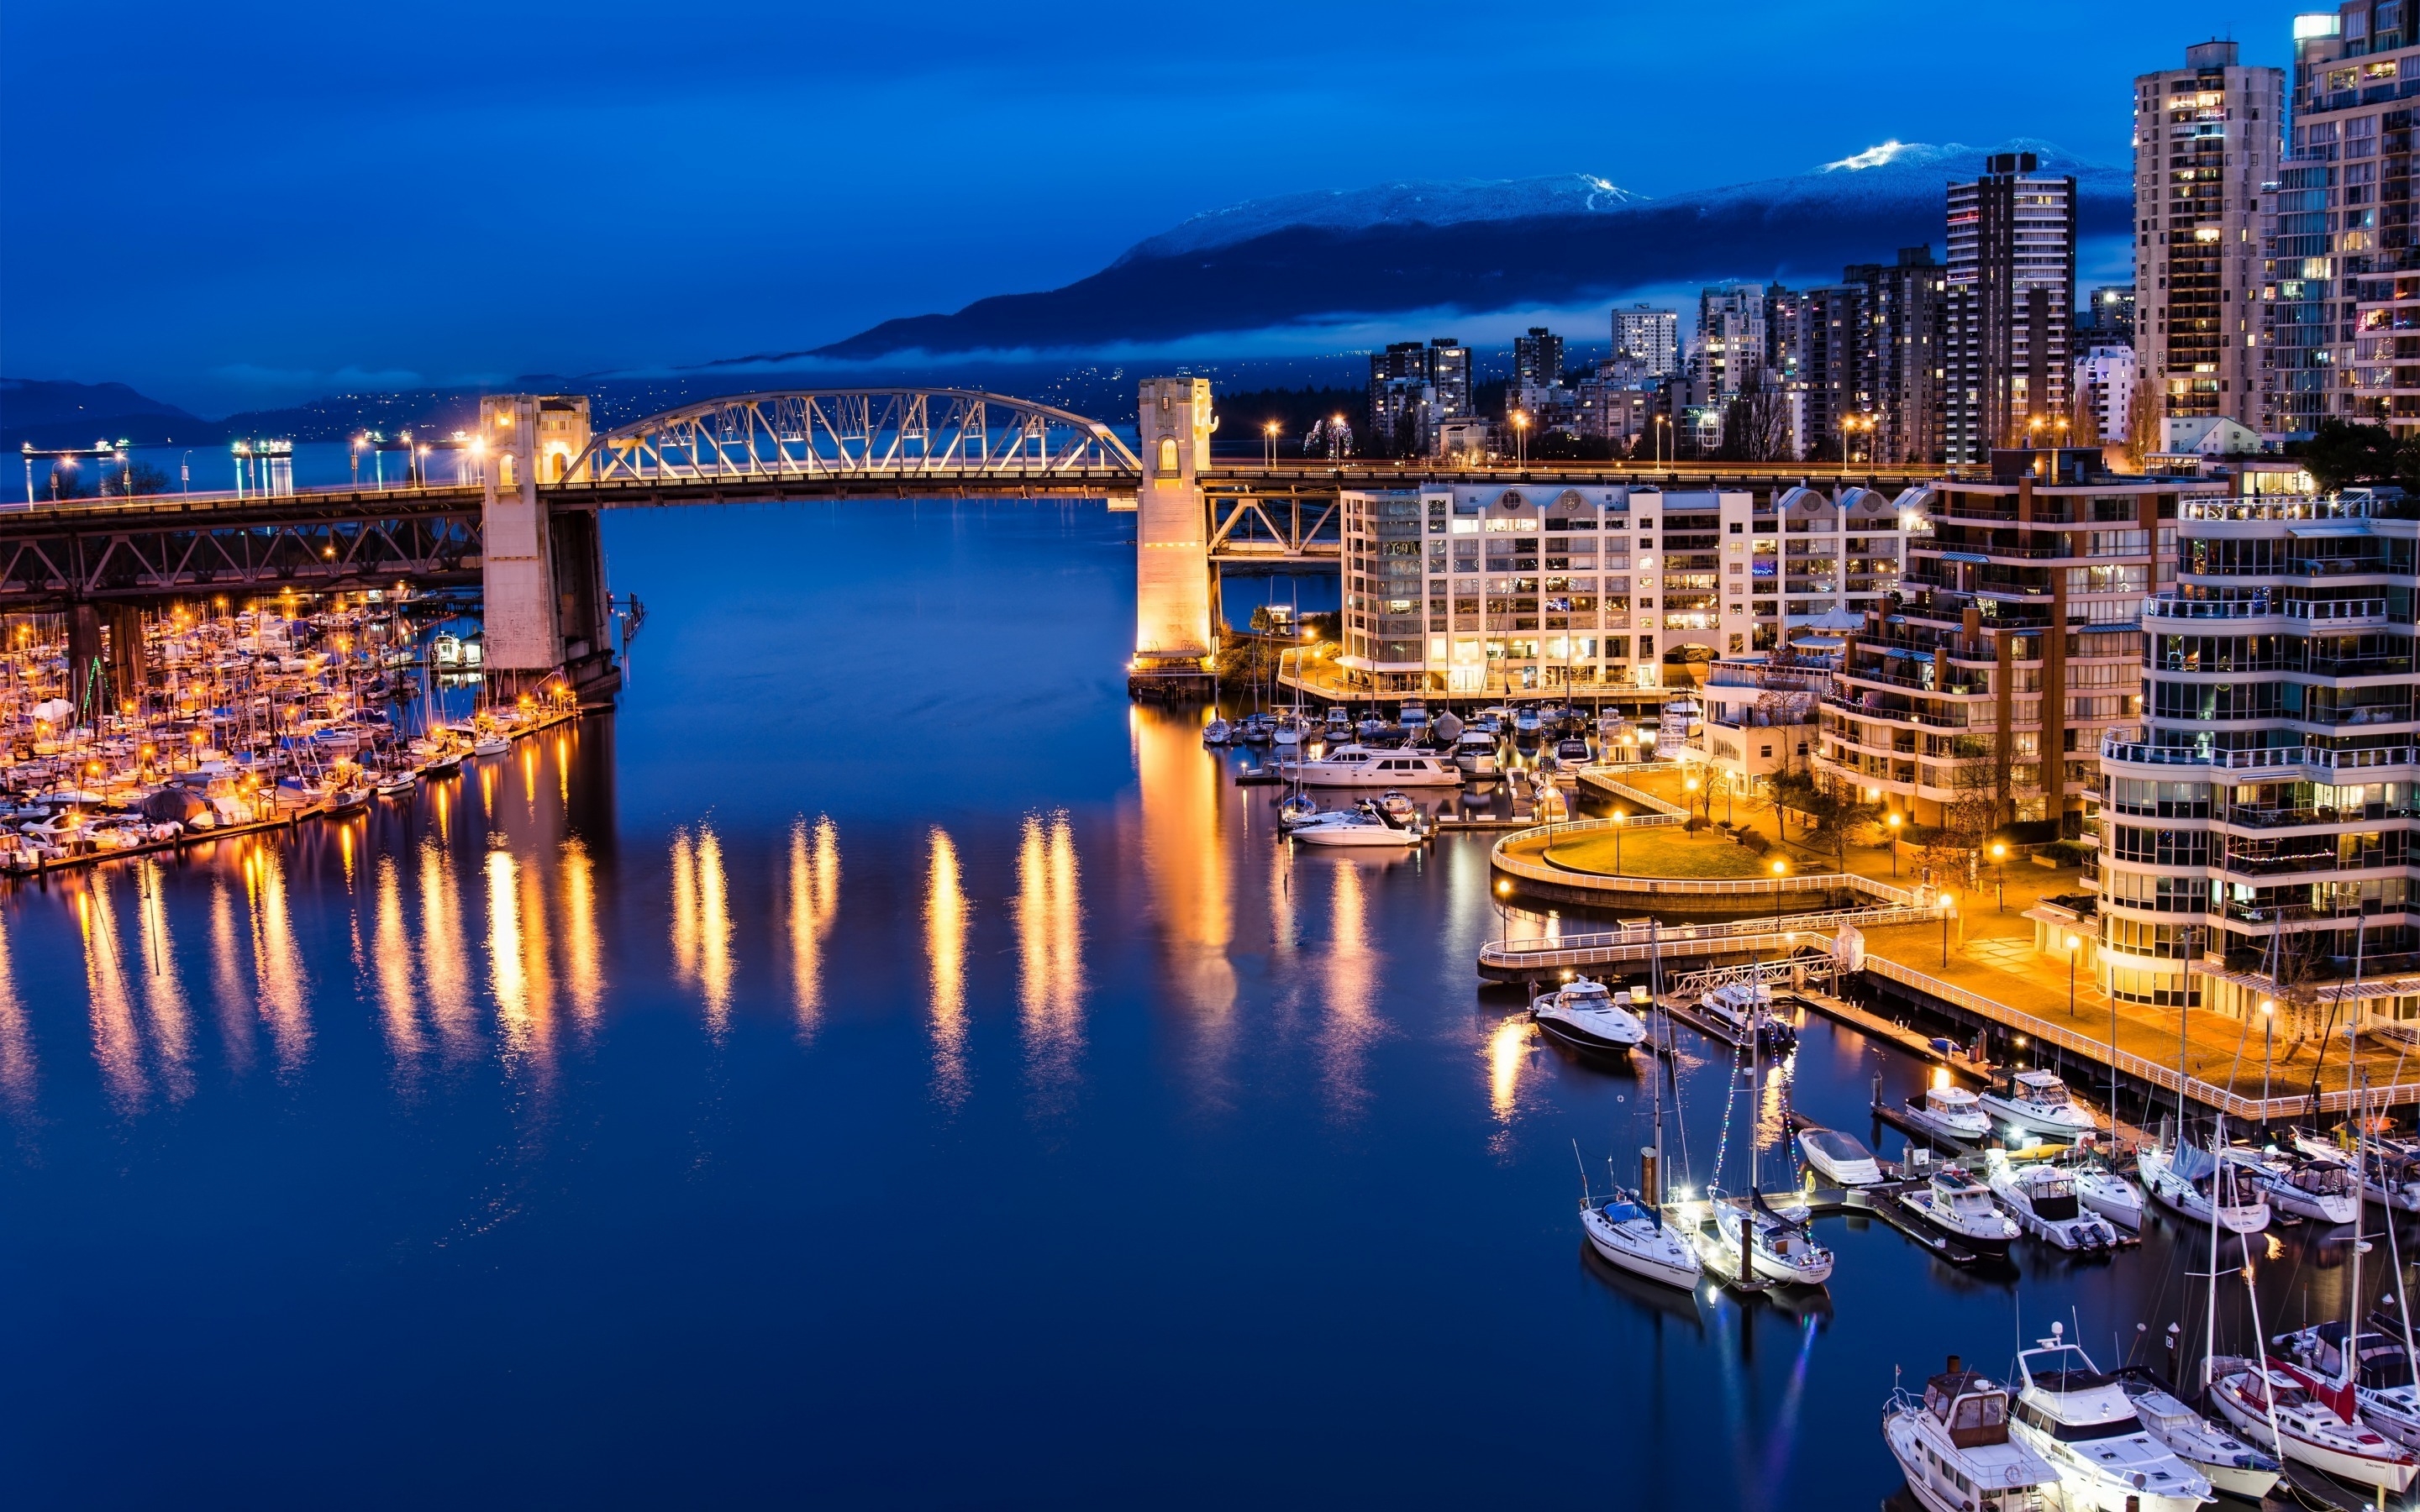 Vancouver Canada Night View for 2880 x 1800 Retina Display resolution